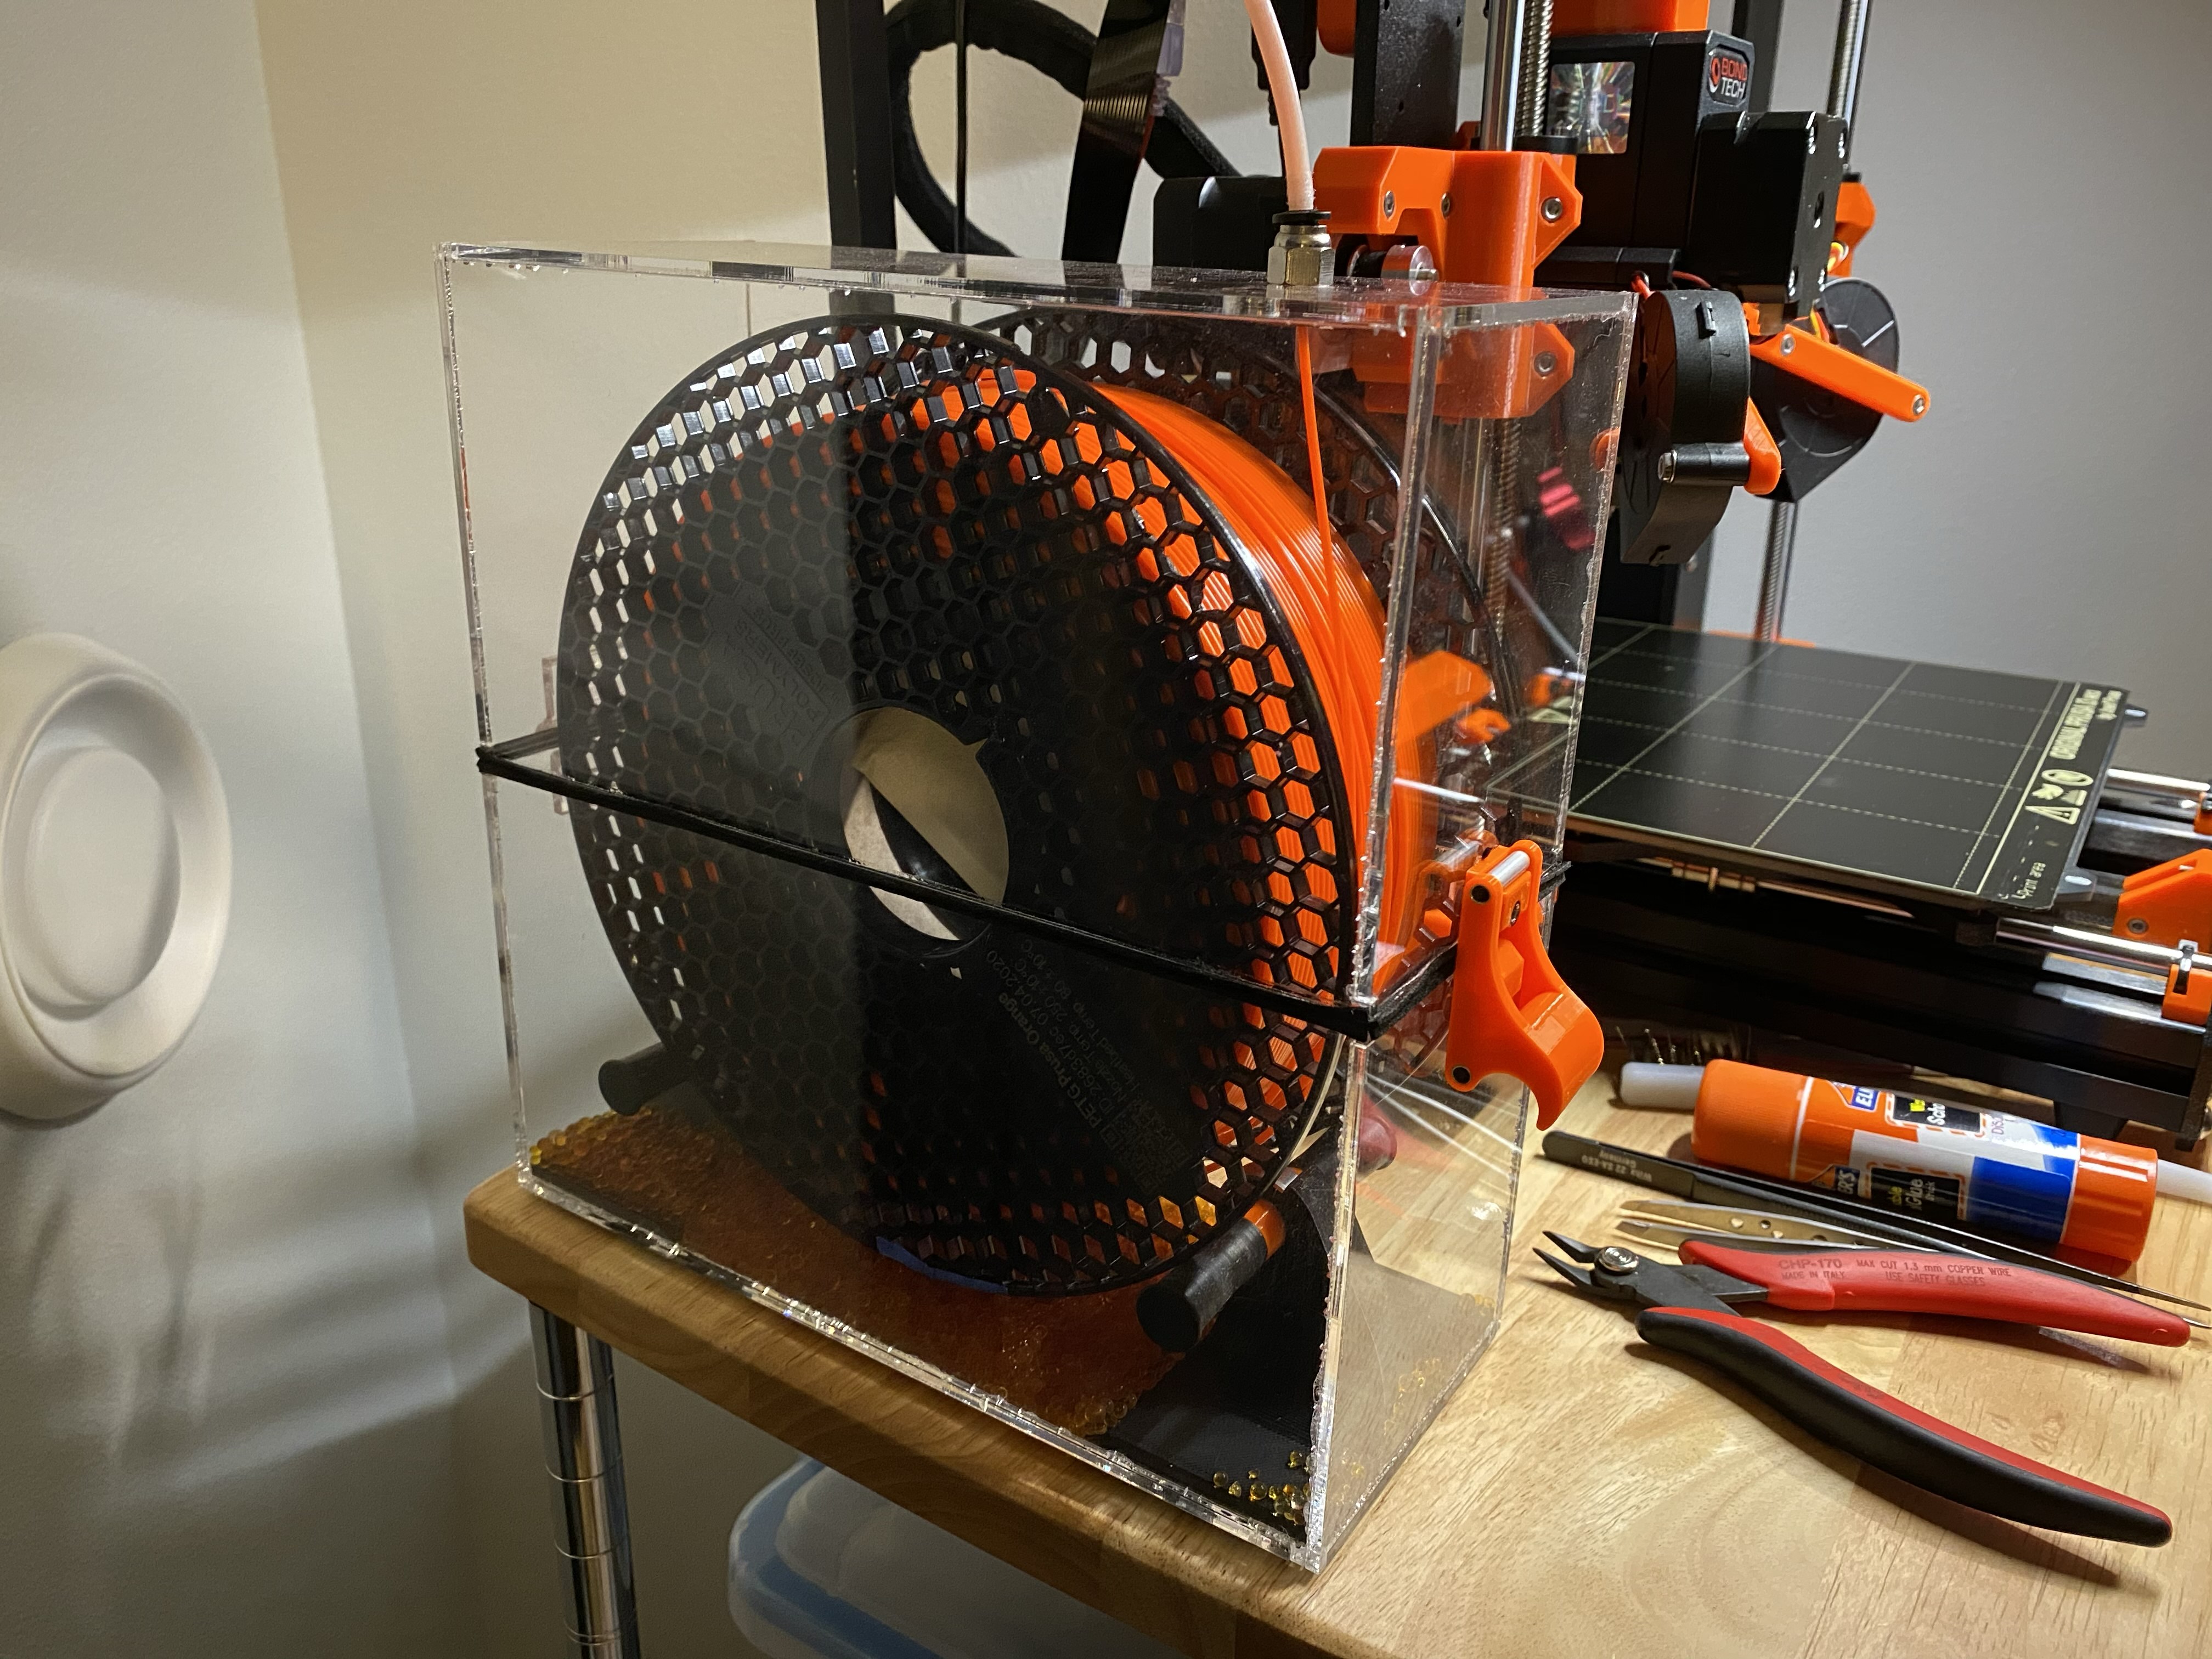 A 'Smart' Filament Dry Box which uses heat generated by the PC to